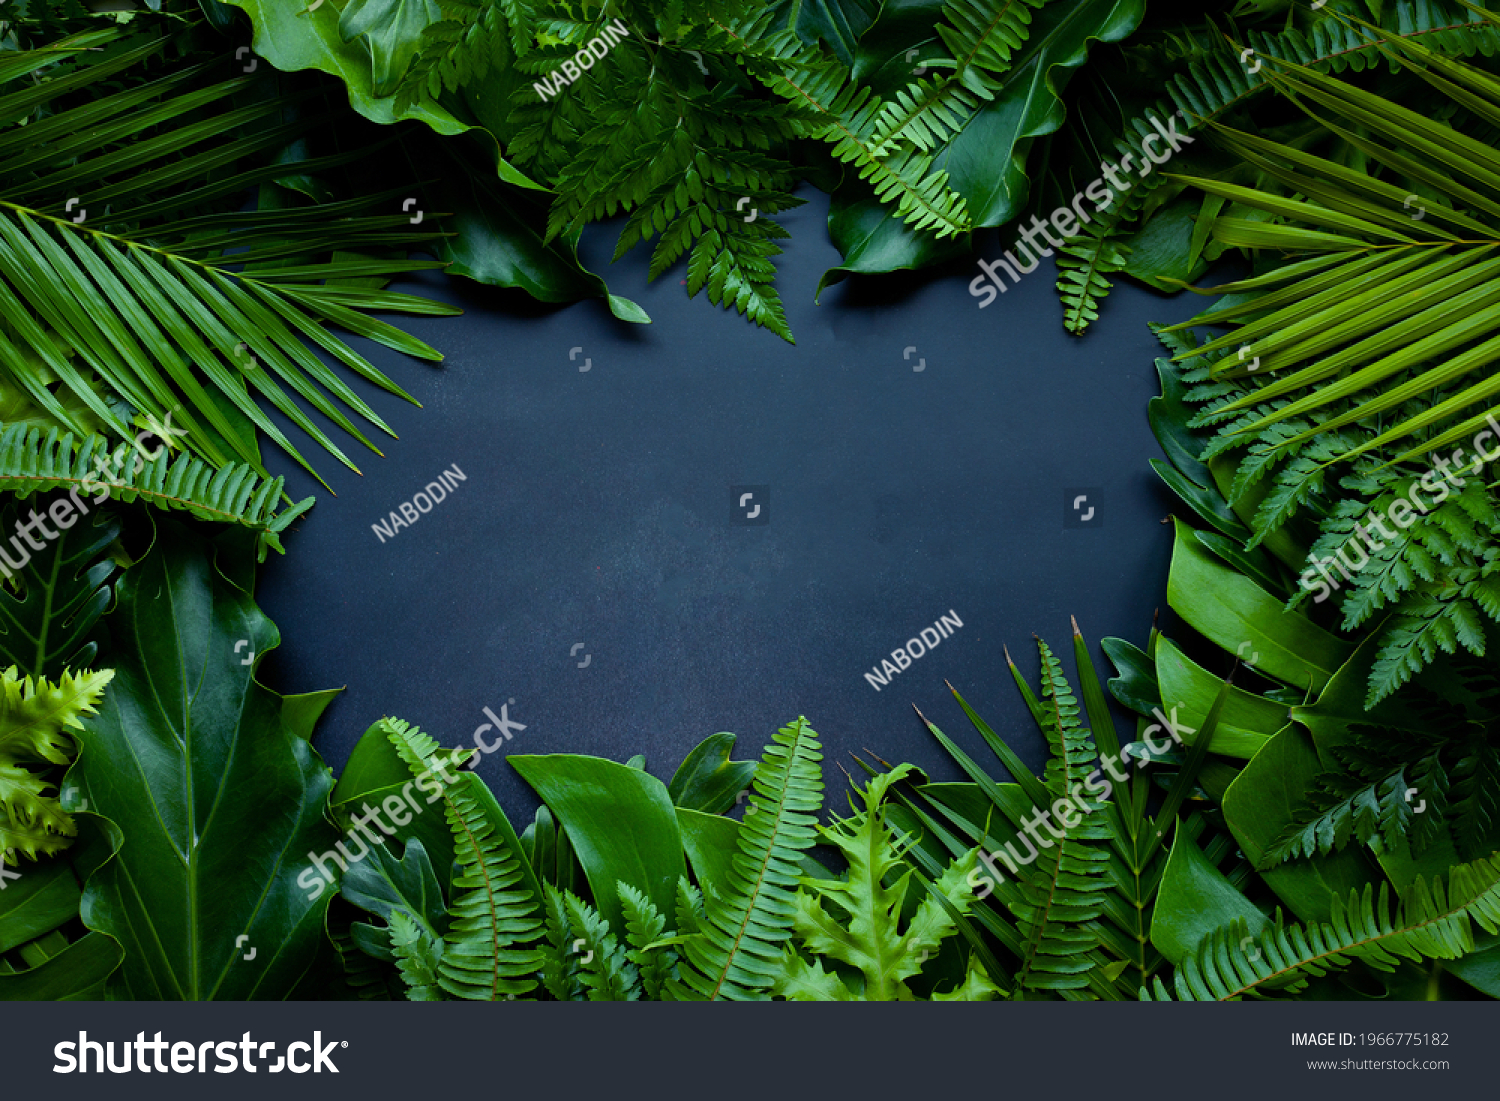 Creative nature layout made of tropical leaves. Summer concept. Fern Palm and monstera leaf on wall textures. Nature beach background layout with free text space. #1966775182